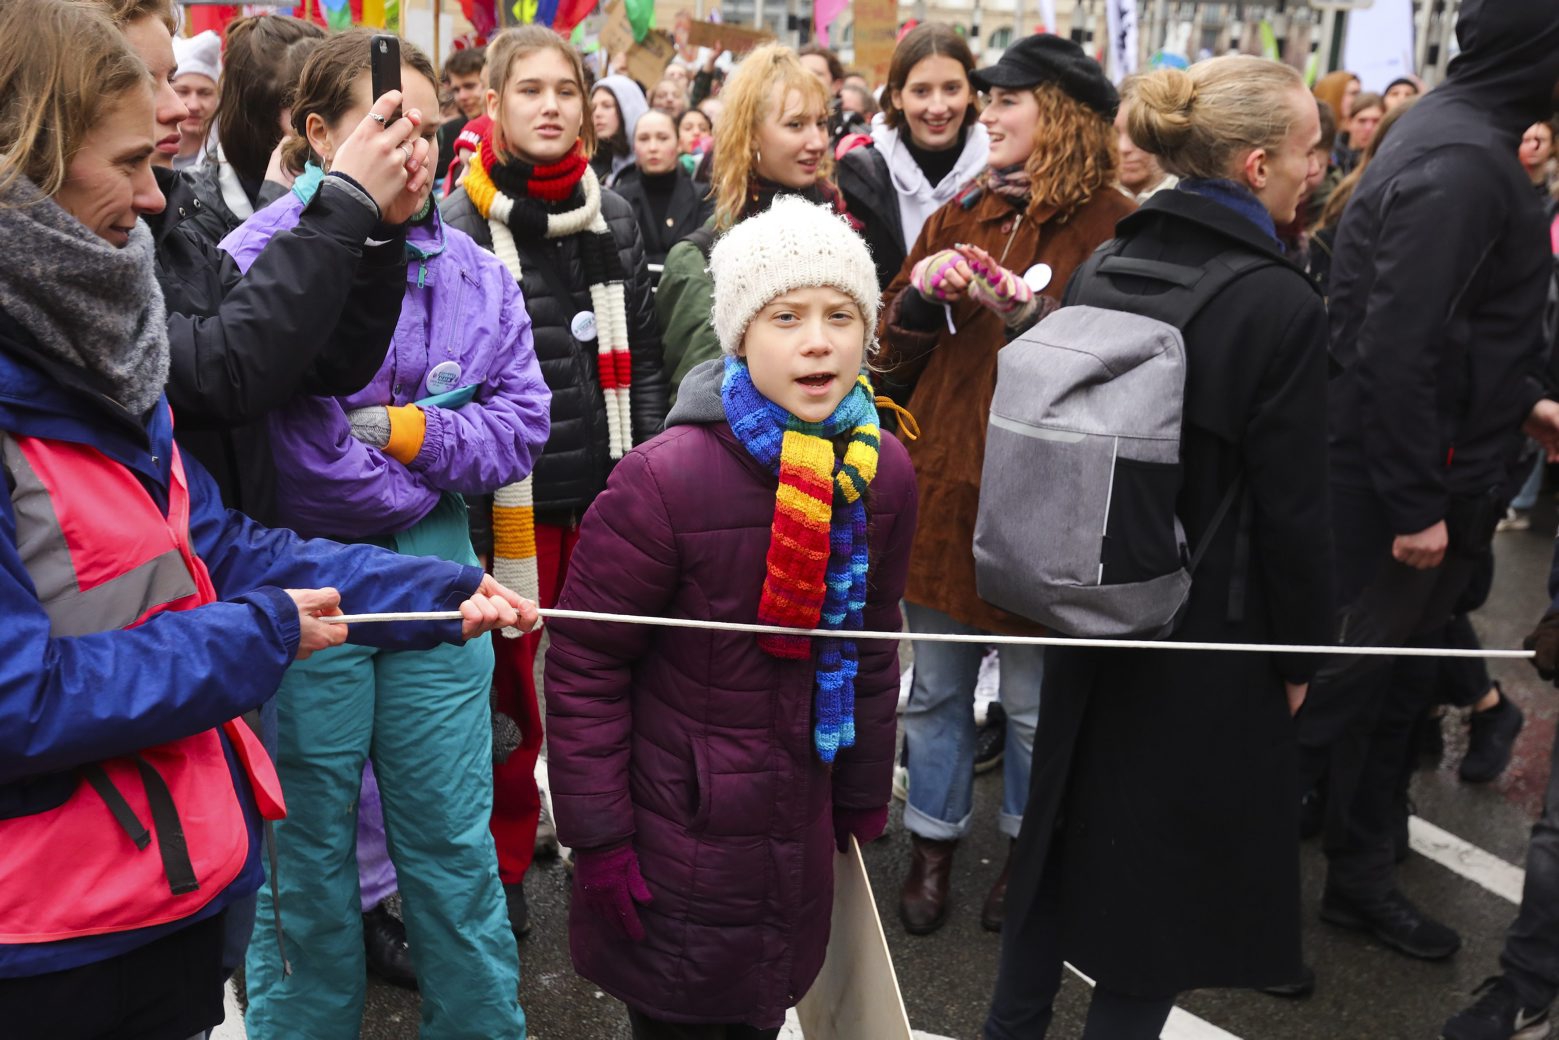 Swedish climate activist Greta Thunberg, centre, marches with others during a climate change protest in Brussels, Friday, March 6, 2020. (AP Photo/Olivier Matthys)
Greta Thunberg Belgium Europe Climate